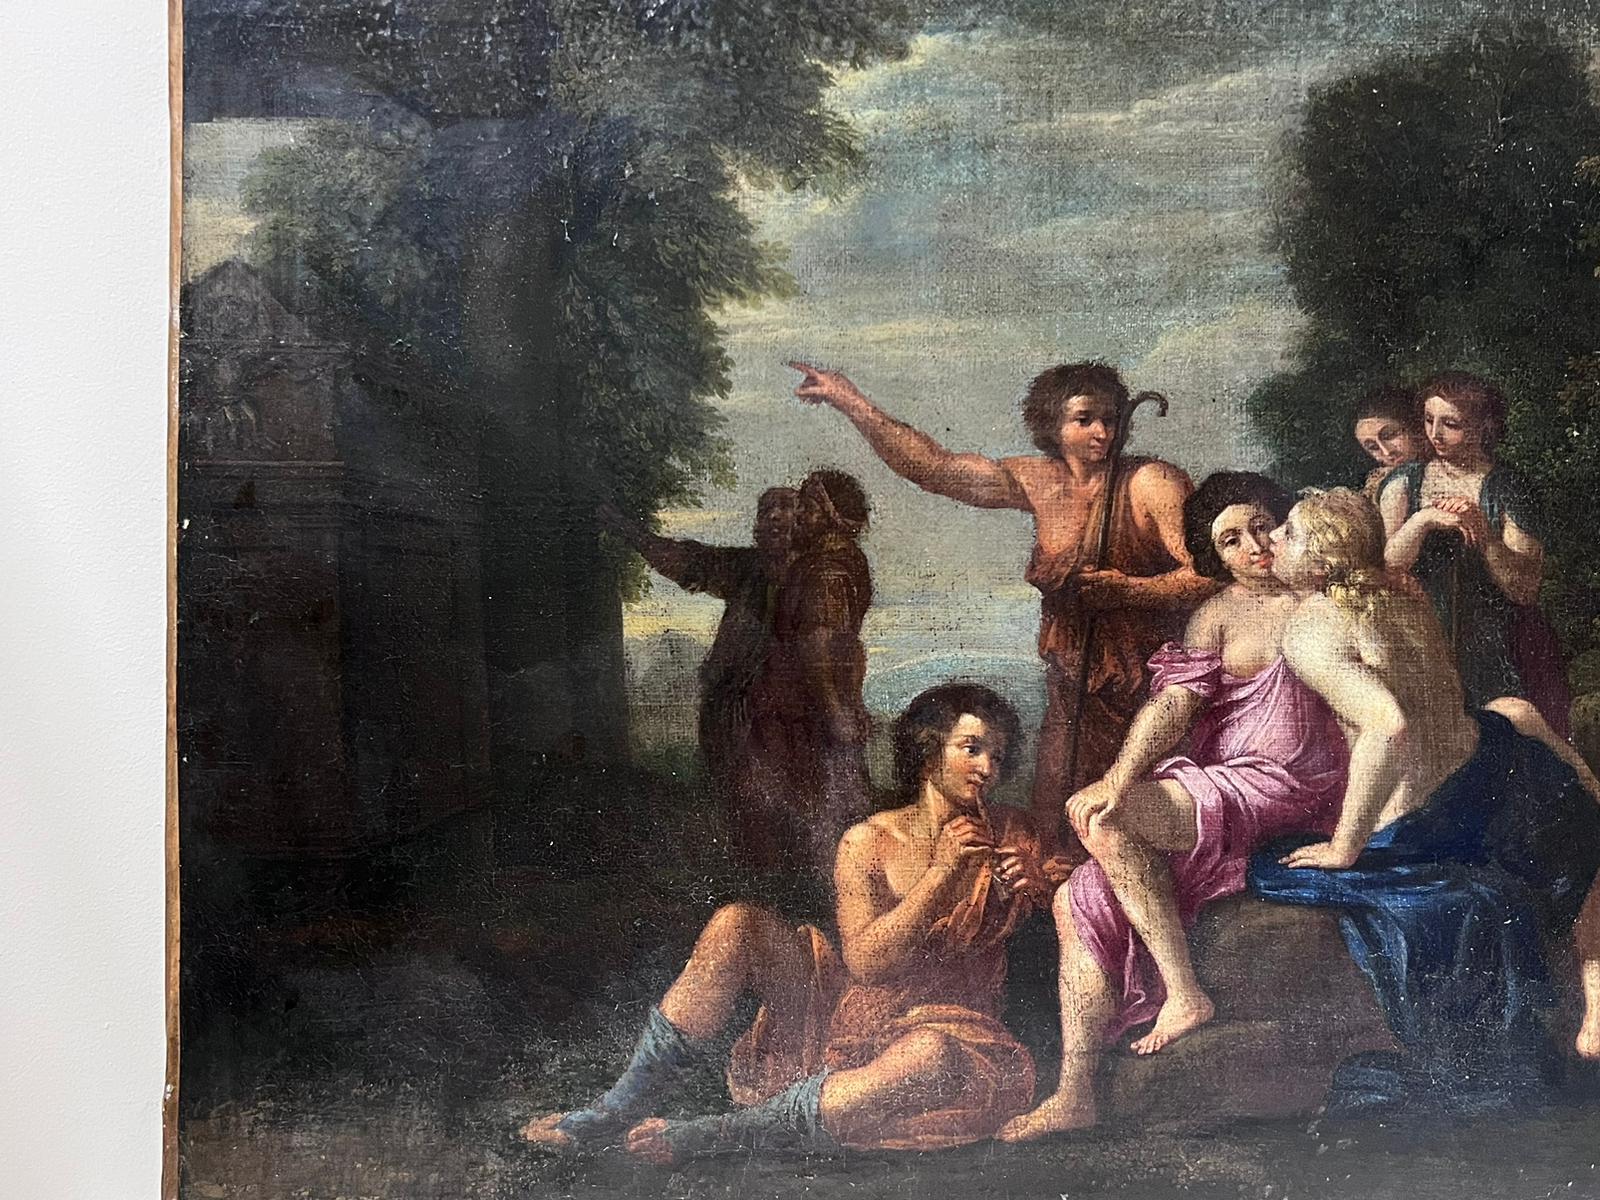 17th century French School
circle of Nicolas Poussin (French 1594-1665)
